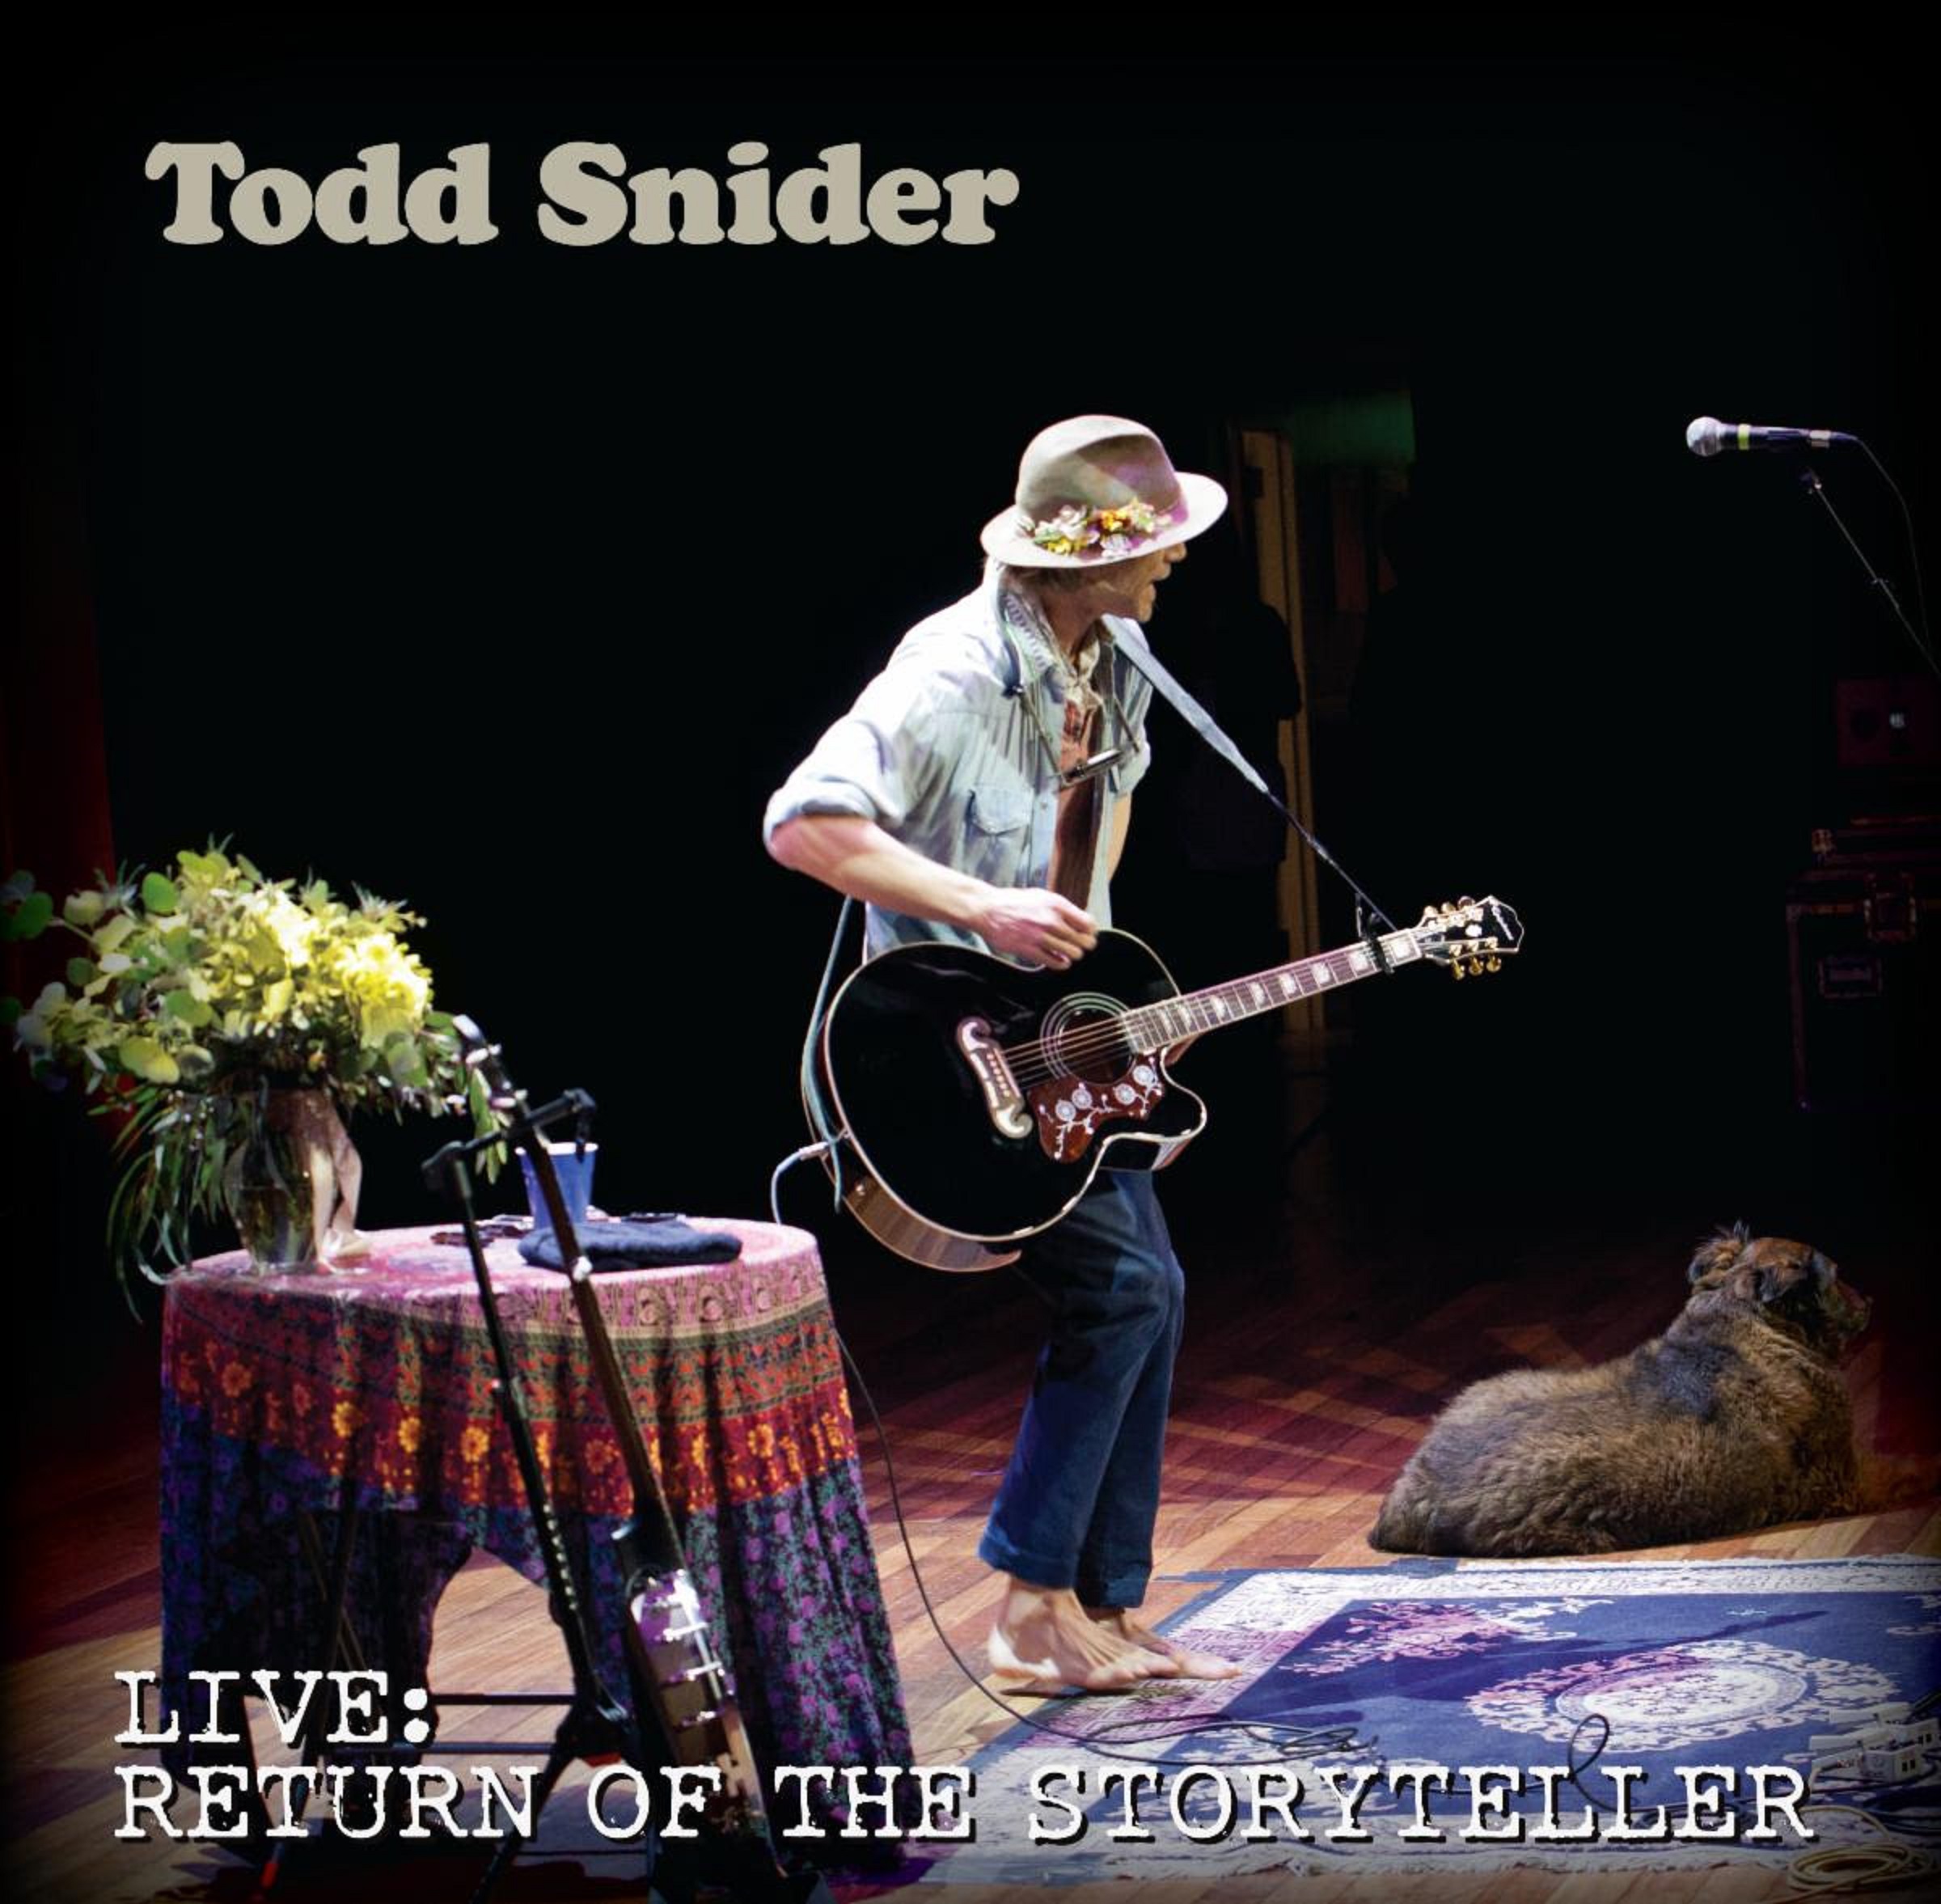 Todd Snider's sizzlin' set opener "Big Finish" (naturally) from upcoming live LP